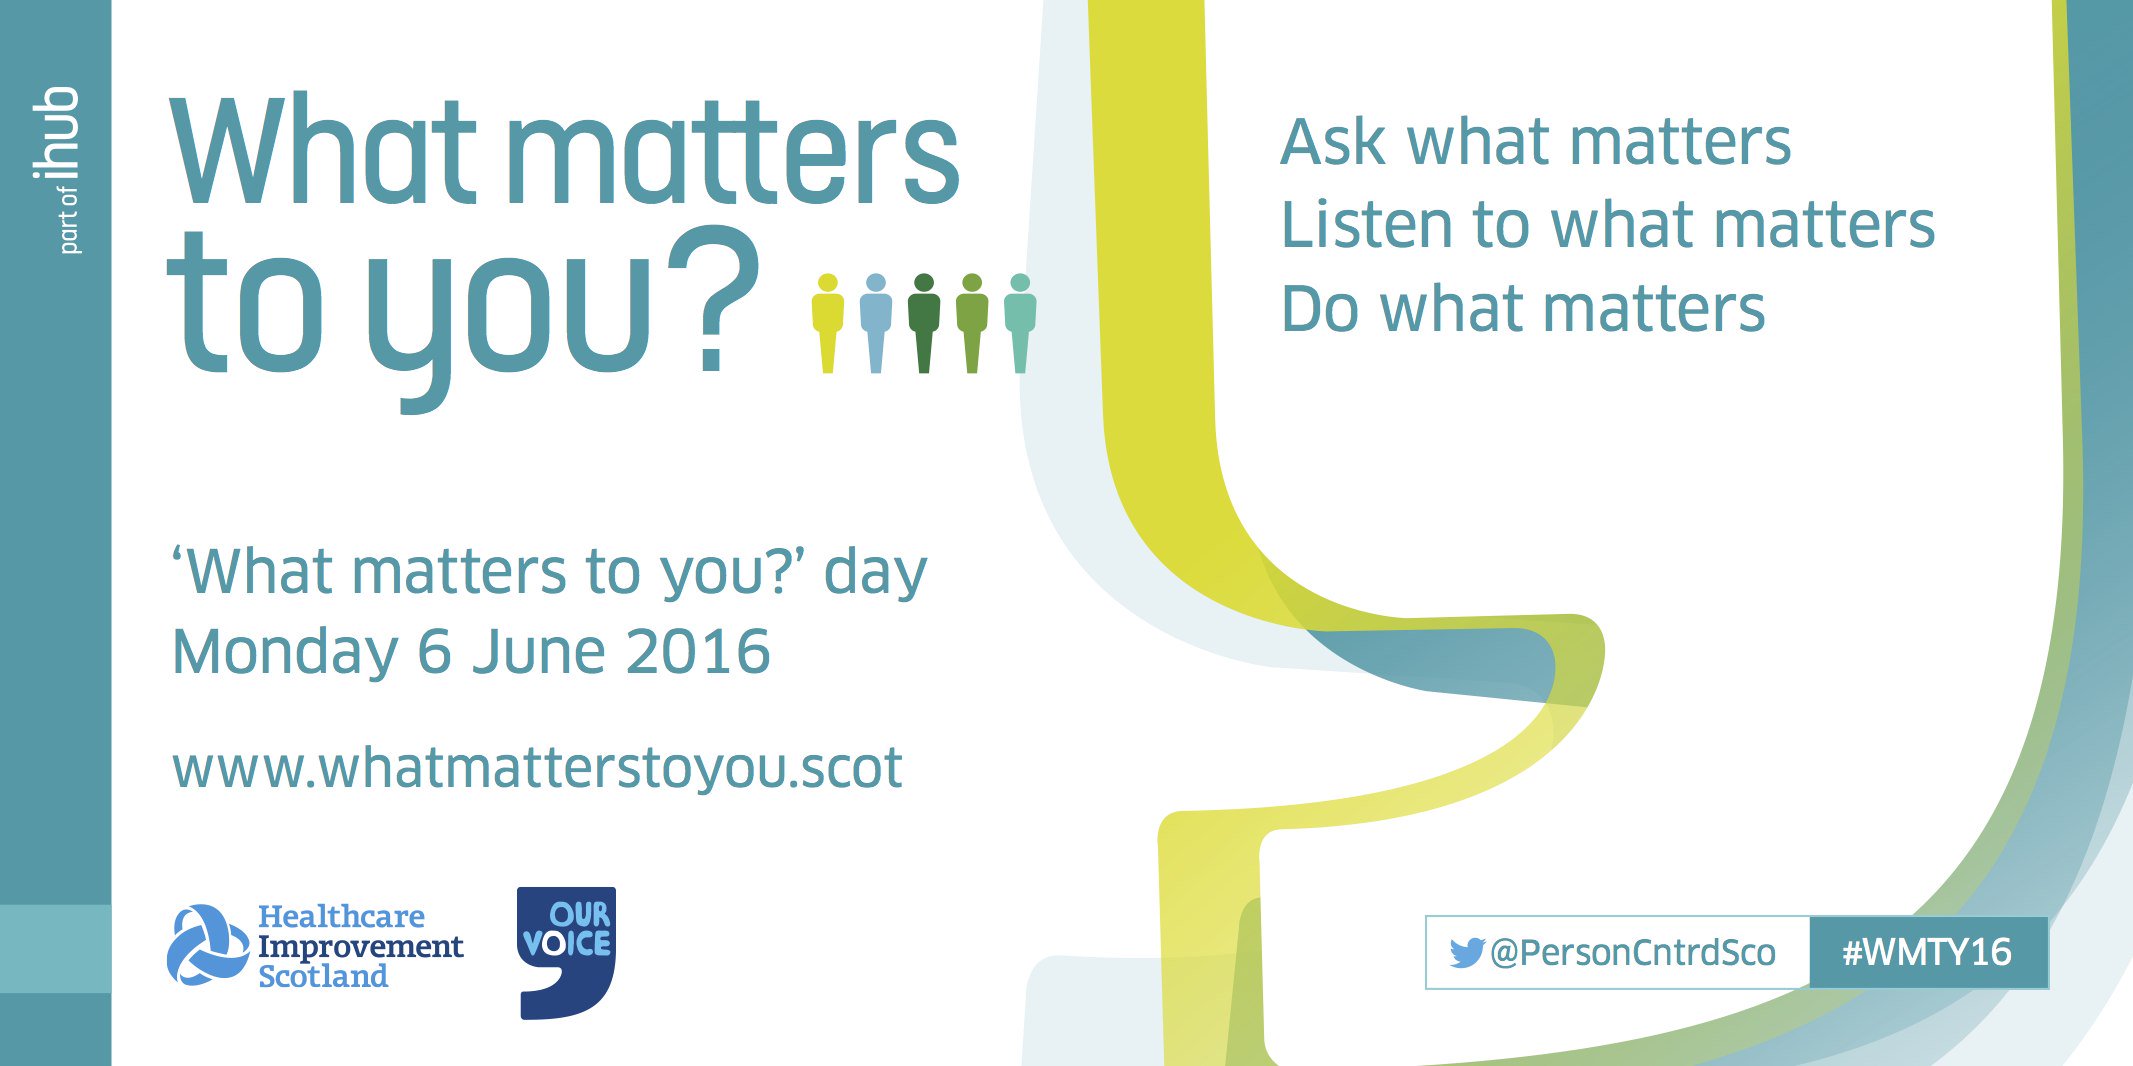 'What matters to you?' day #wmty16 June 6, 2016 featured image